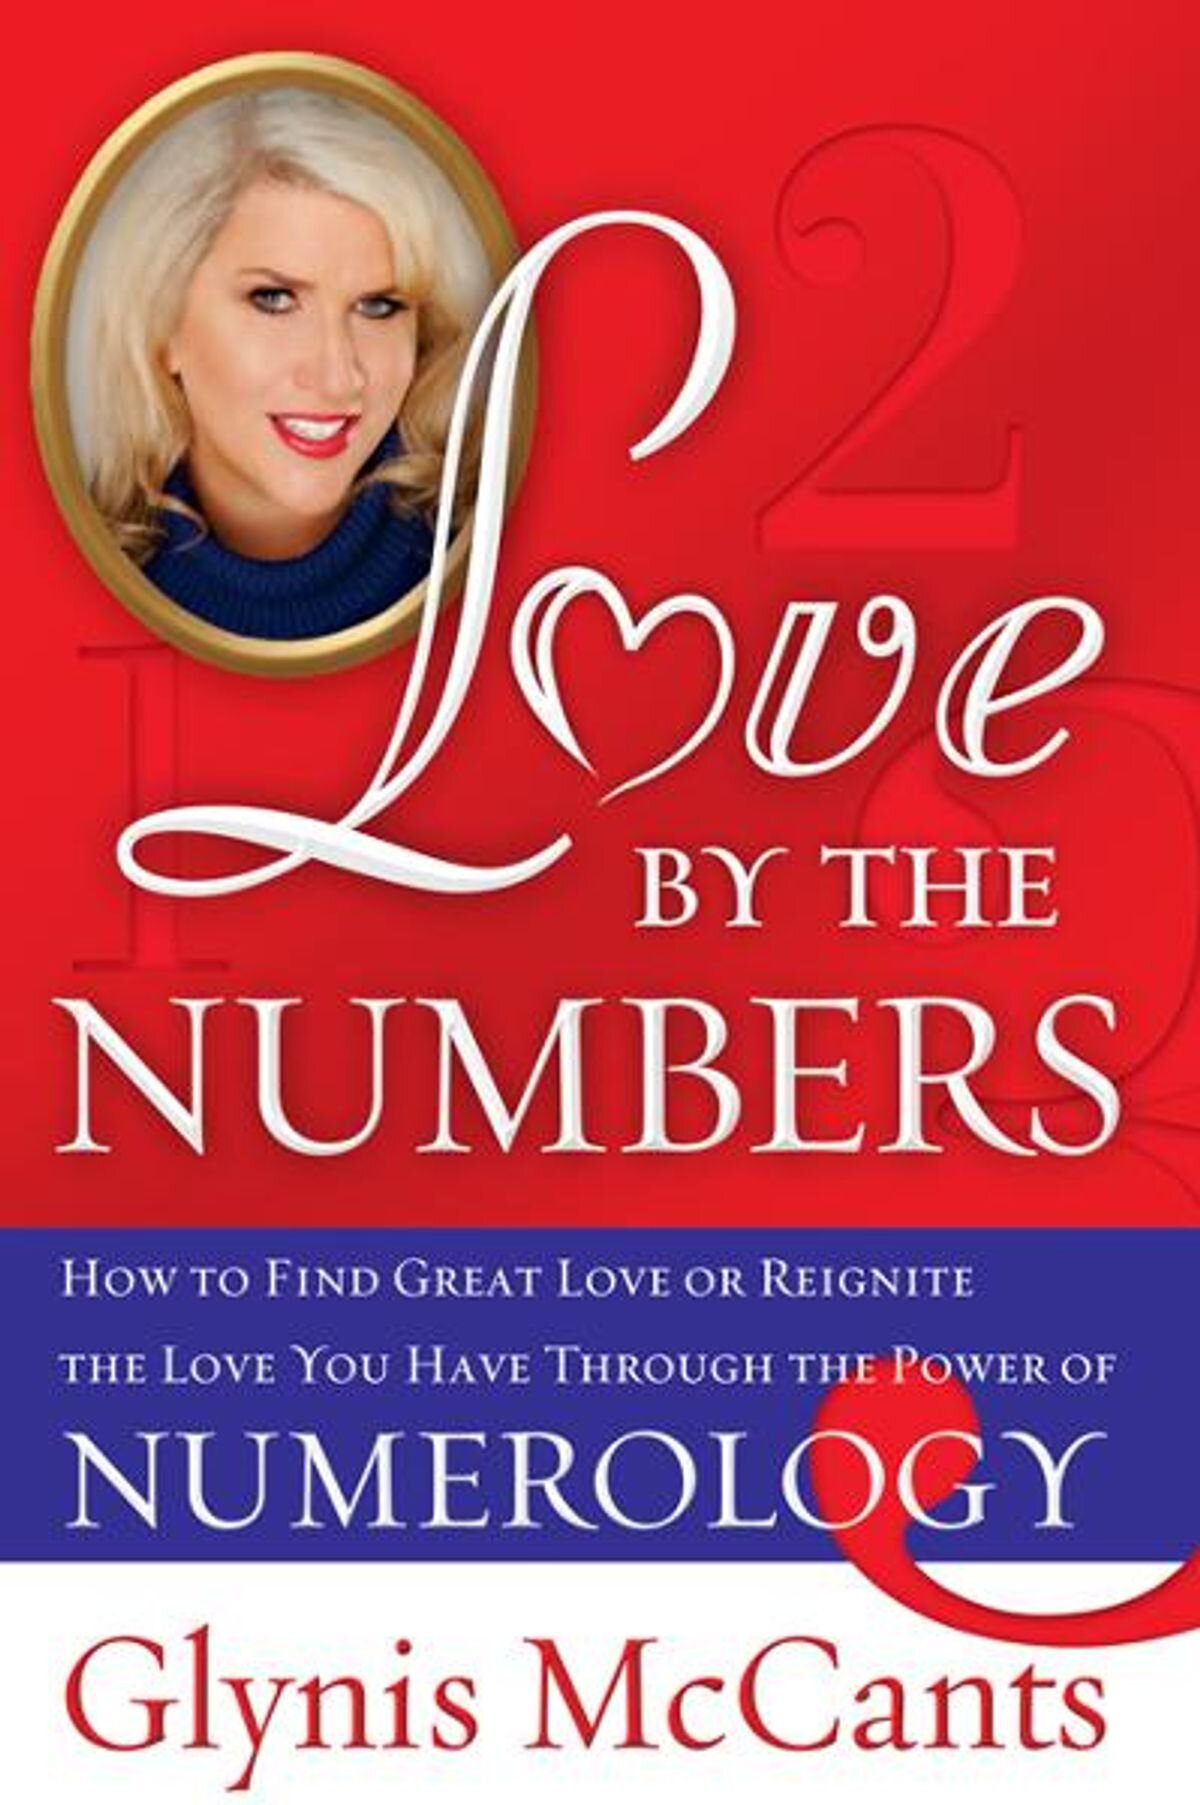  Glynis McCants Book Cover, “Love By The Numbers” 